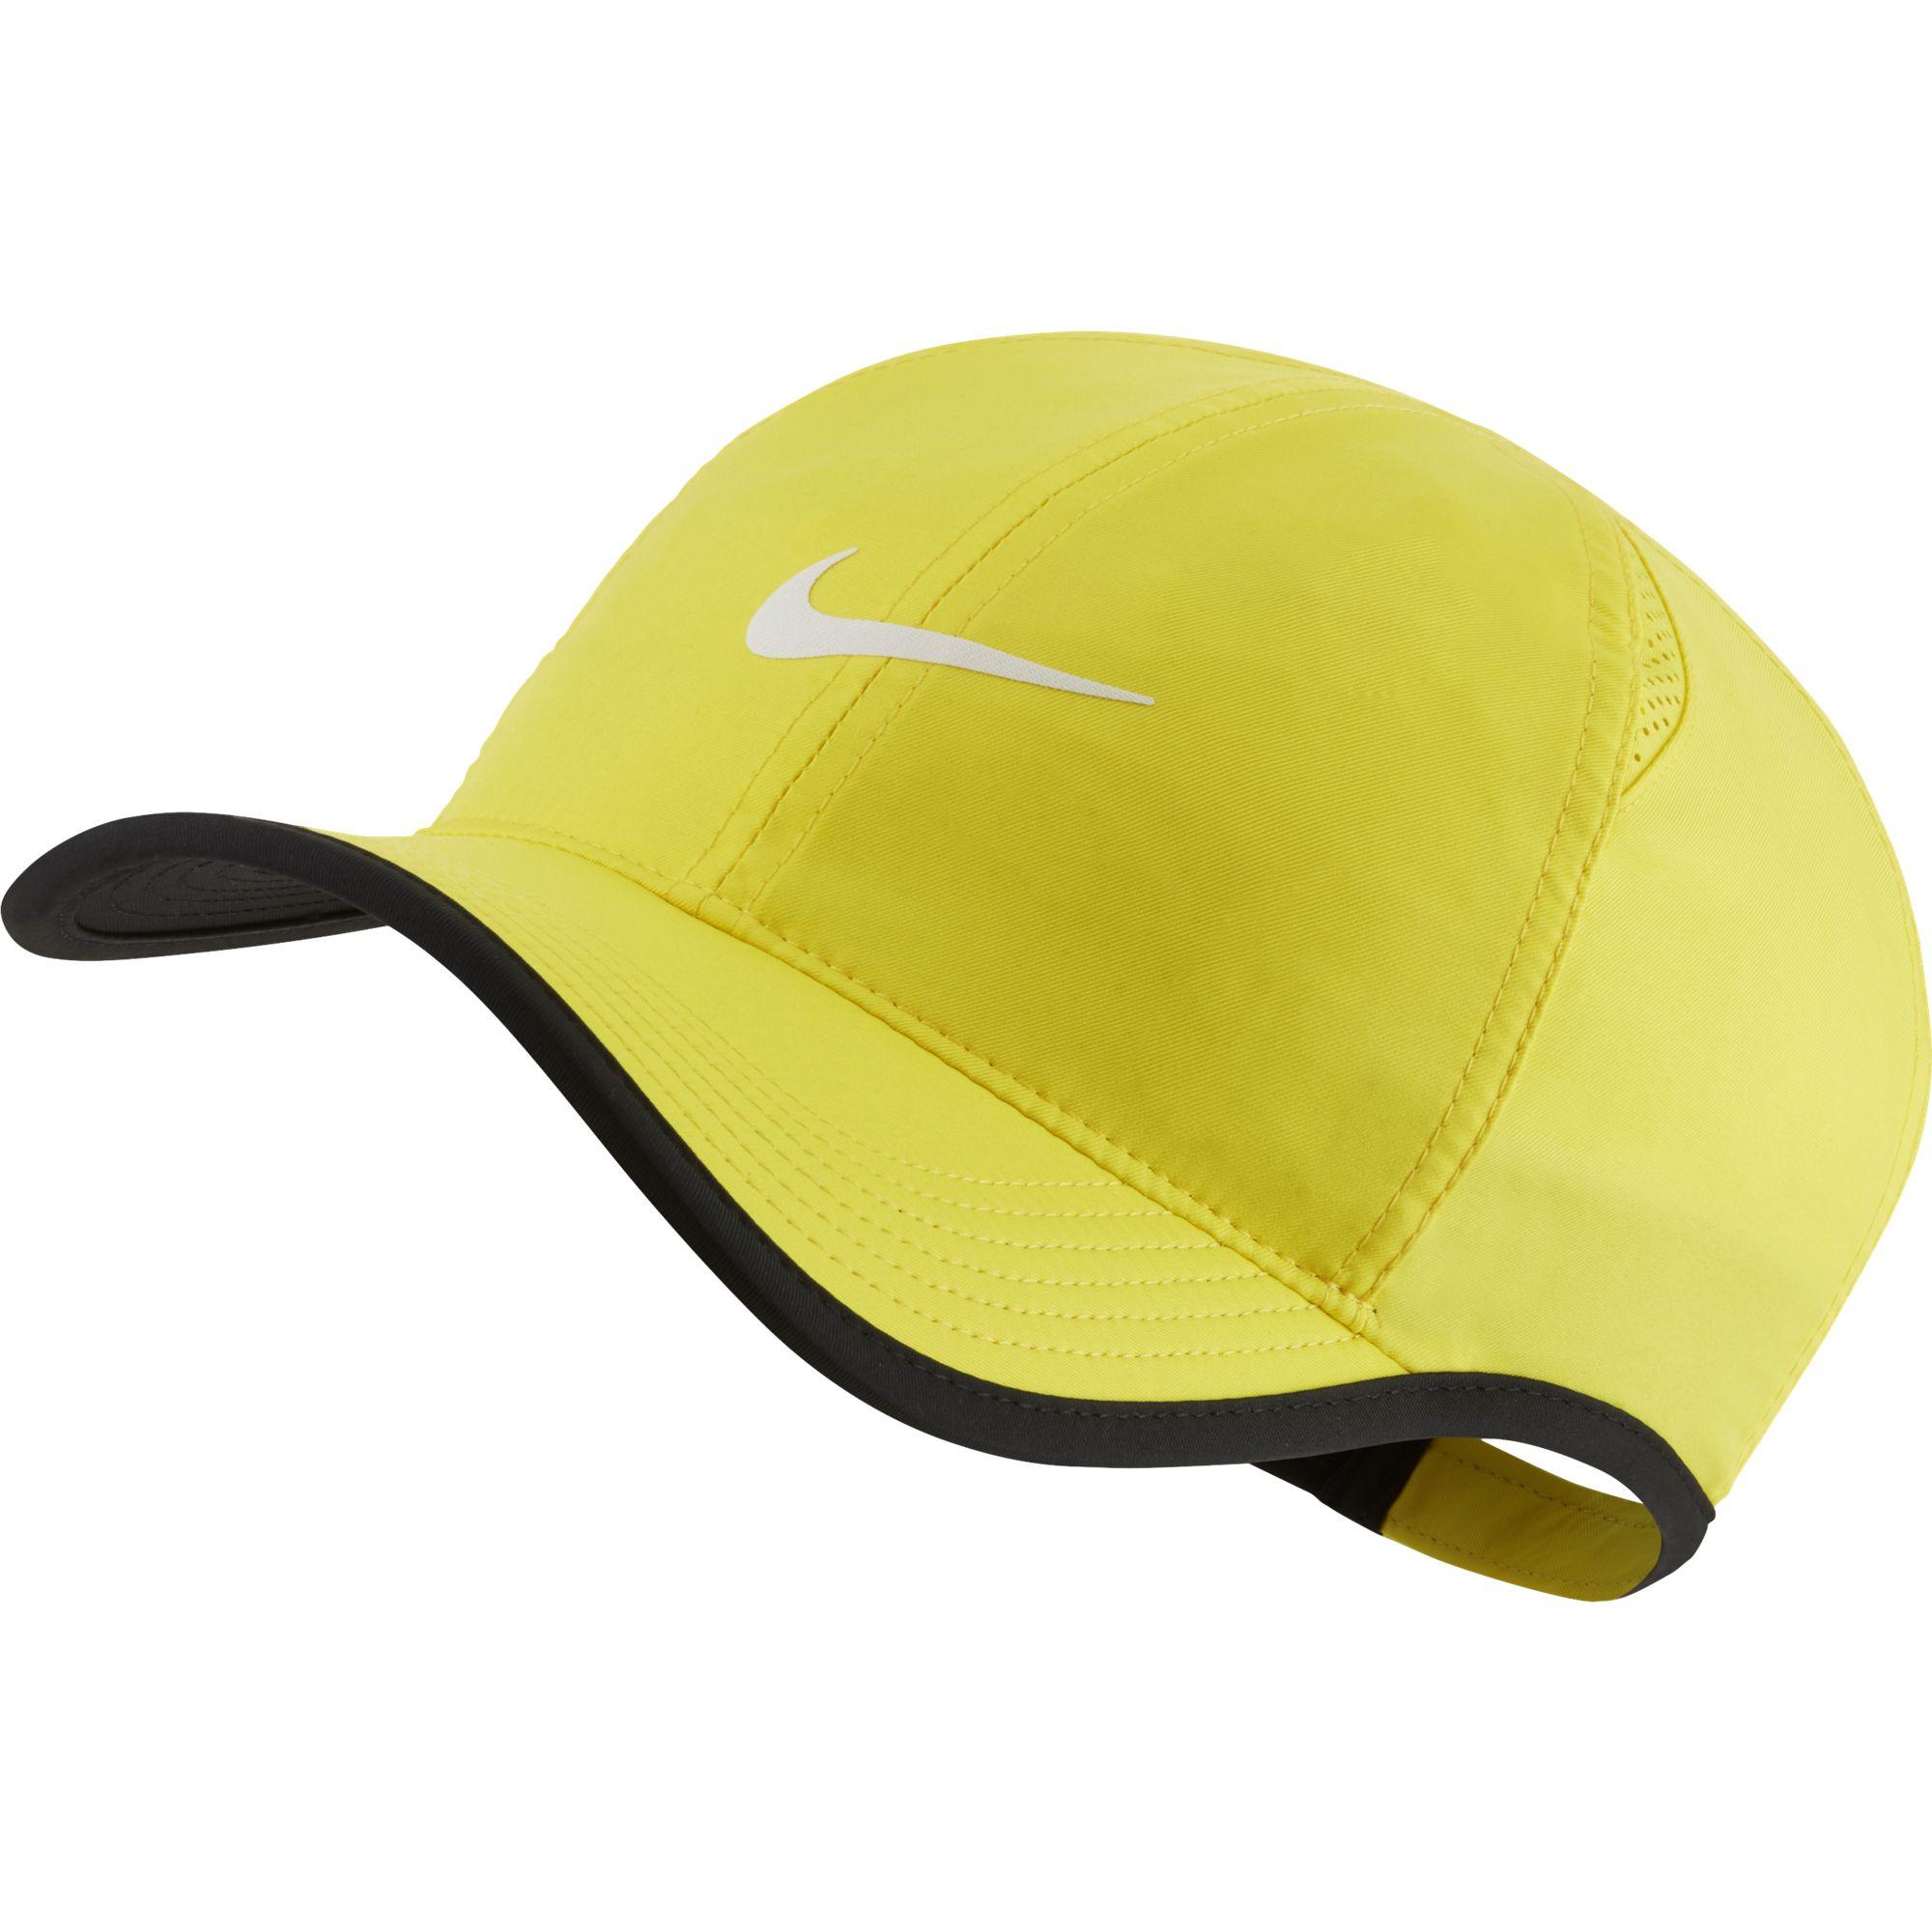 yellow and black nike hat